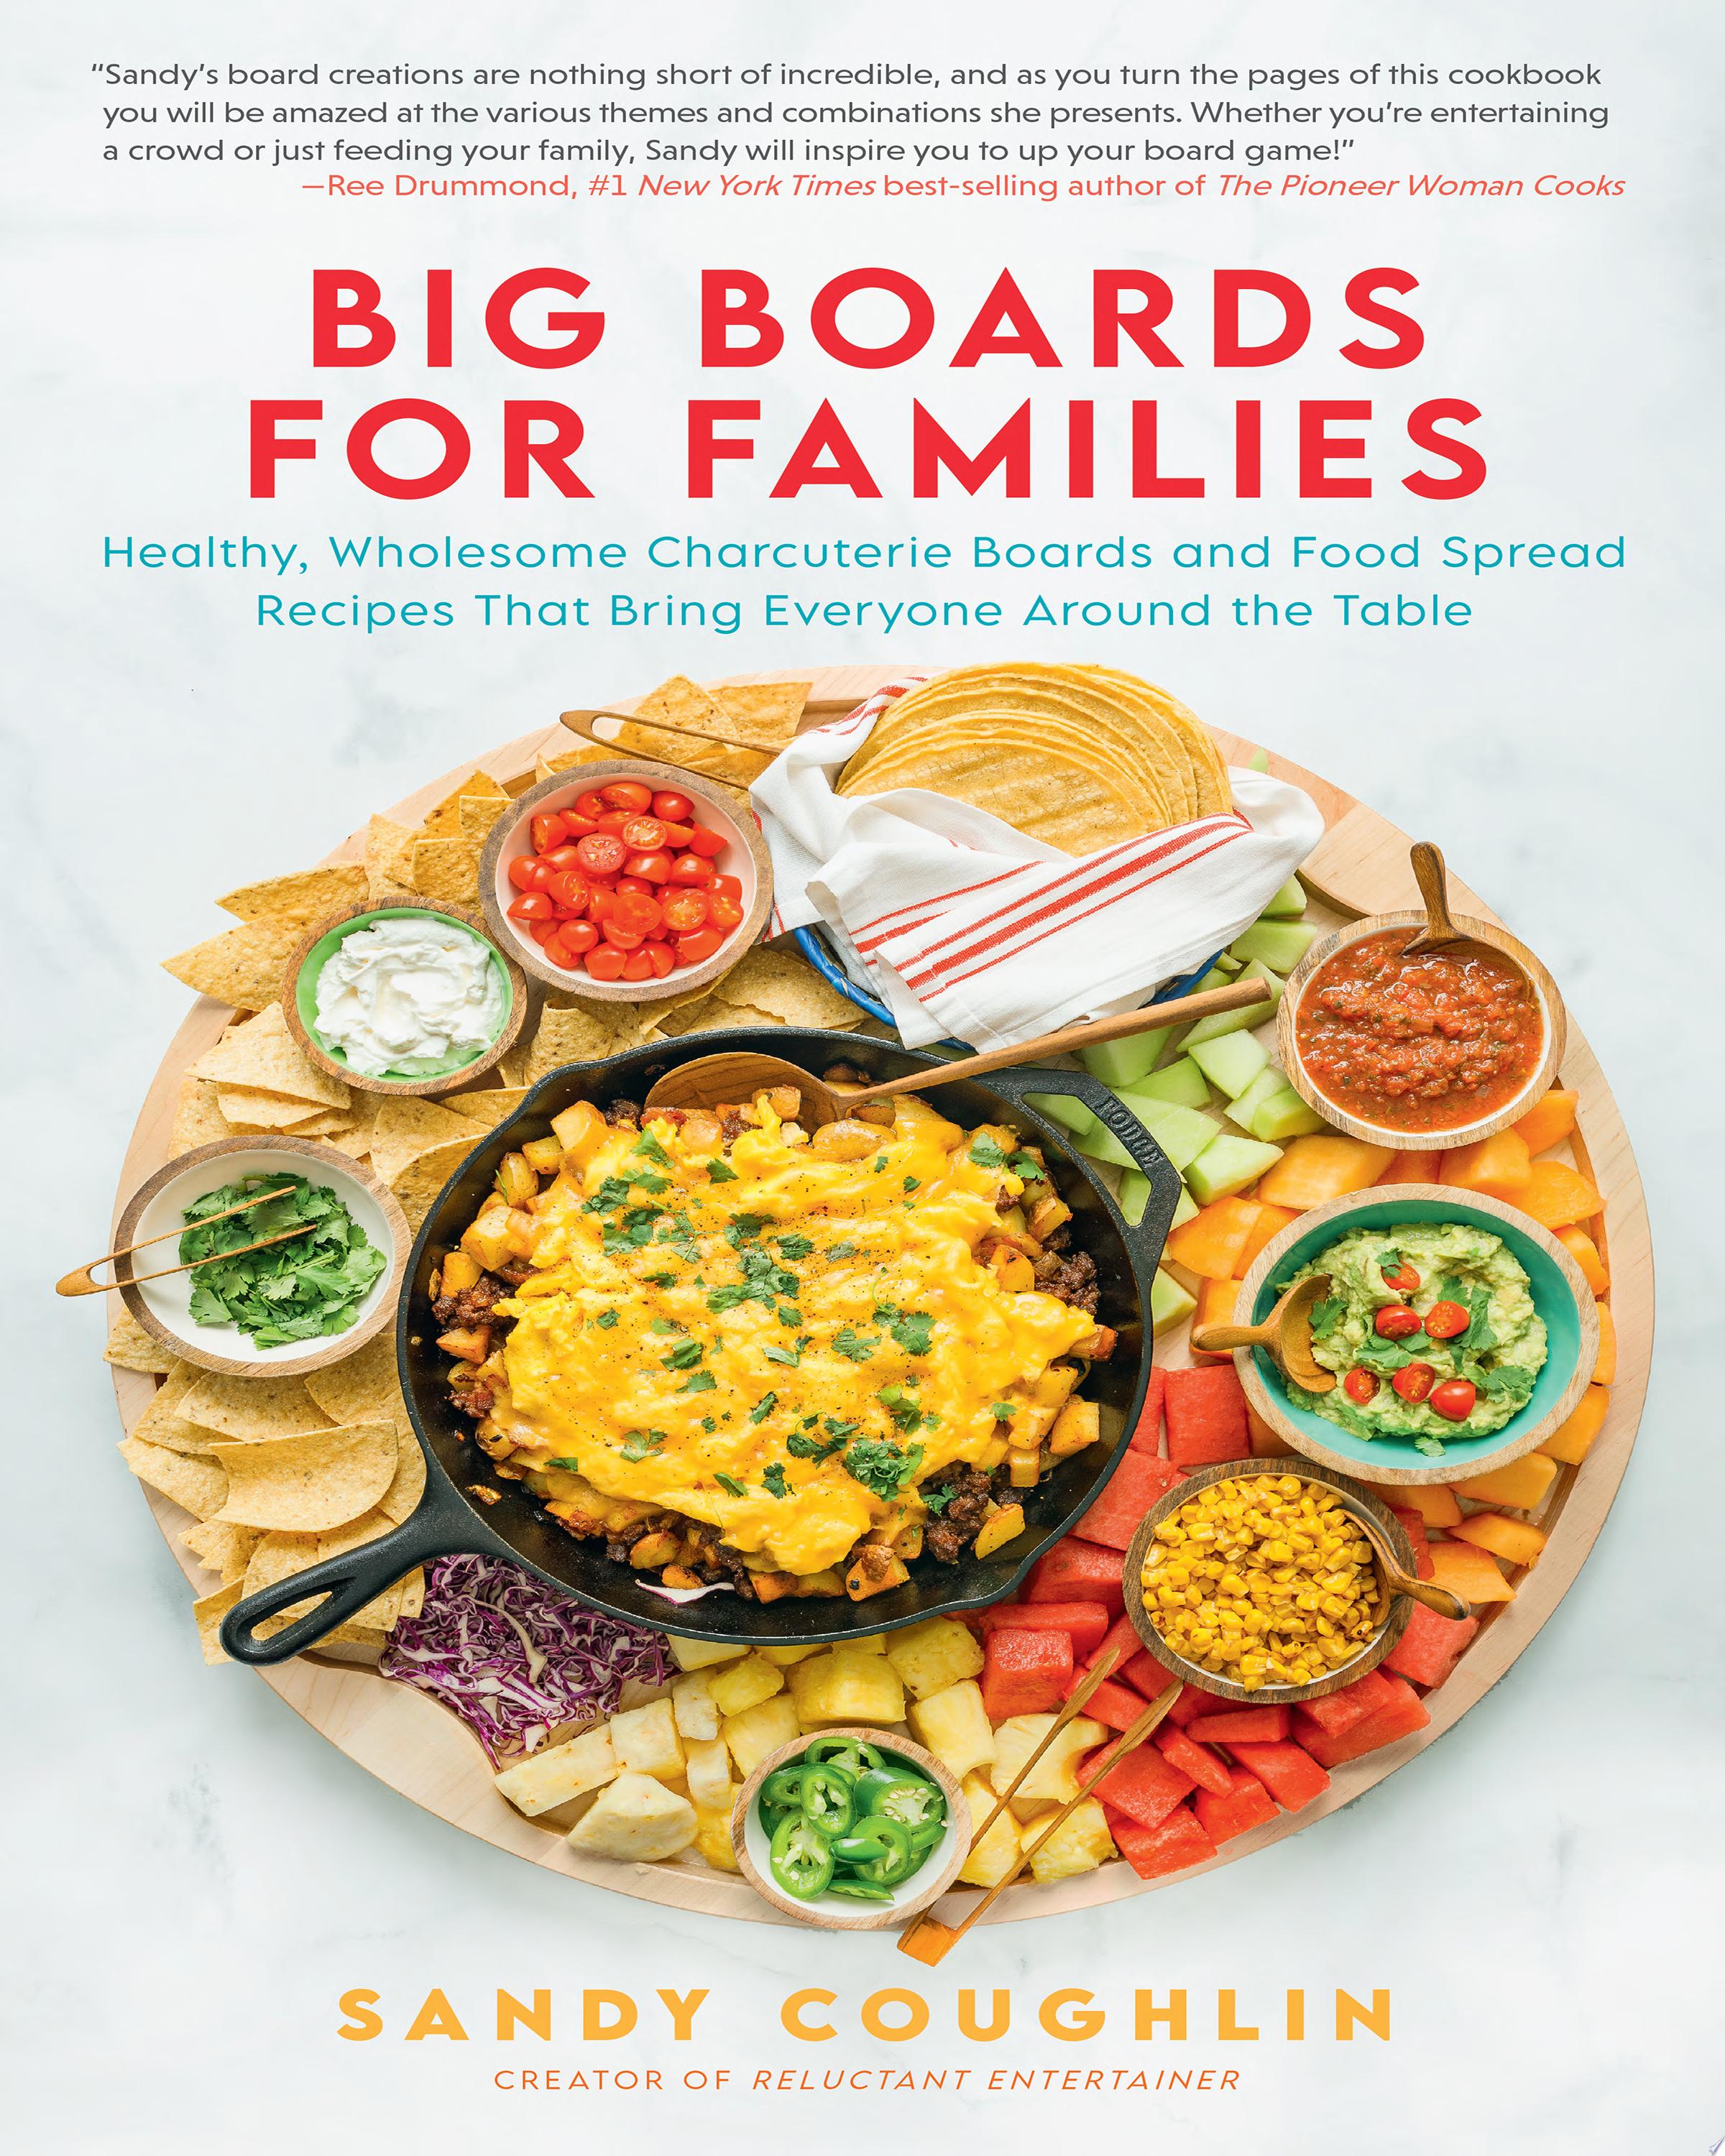 Image for "Big Boards for Families"